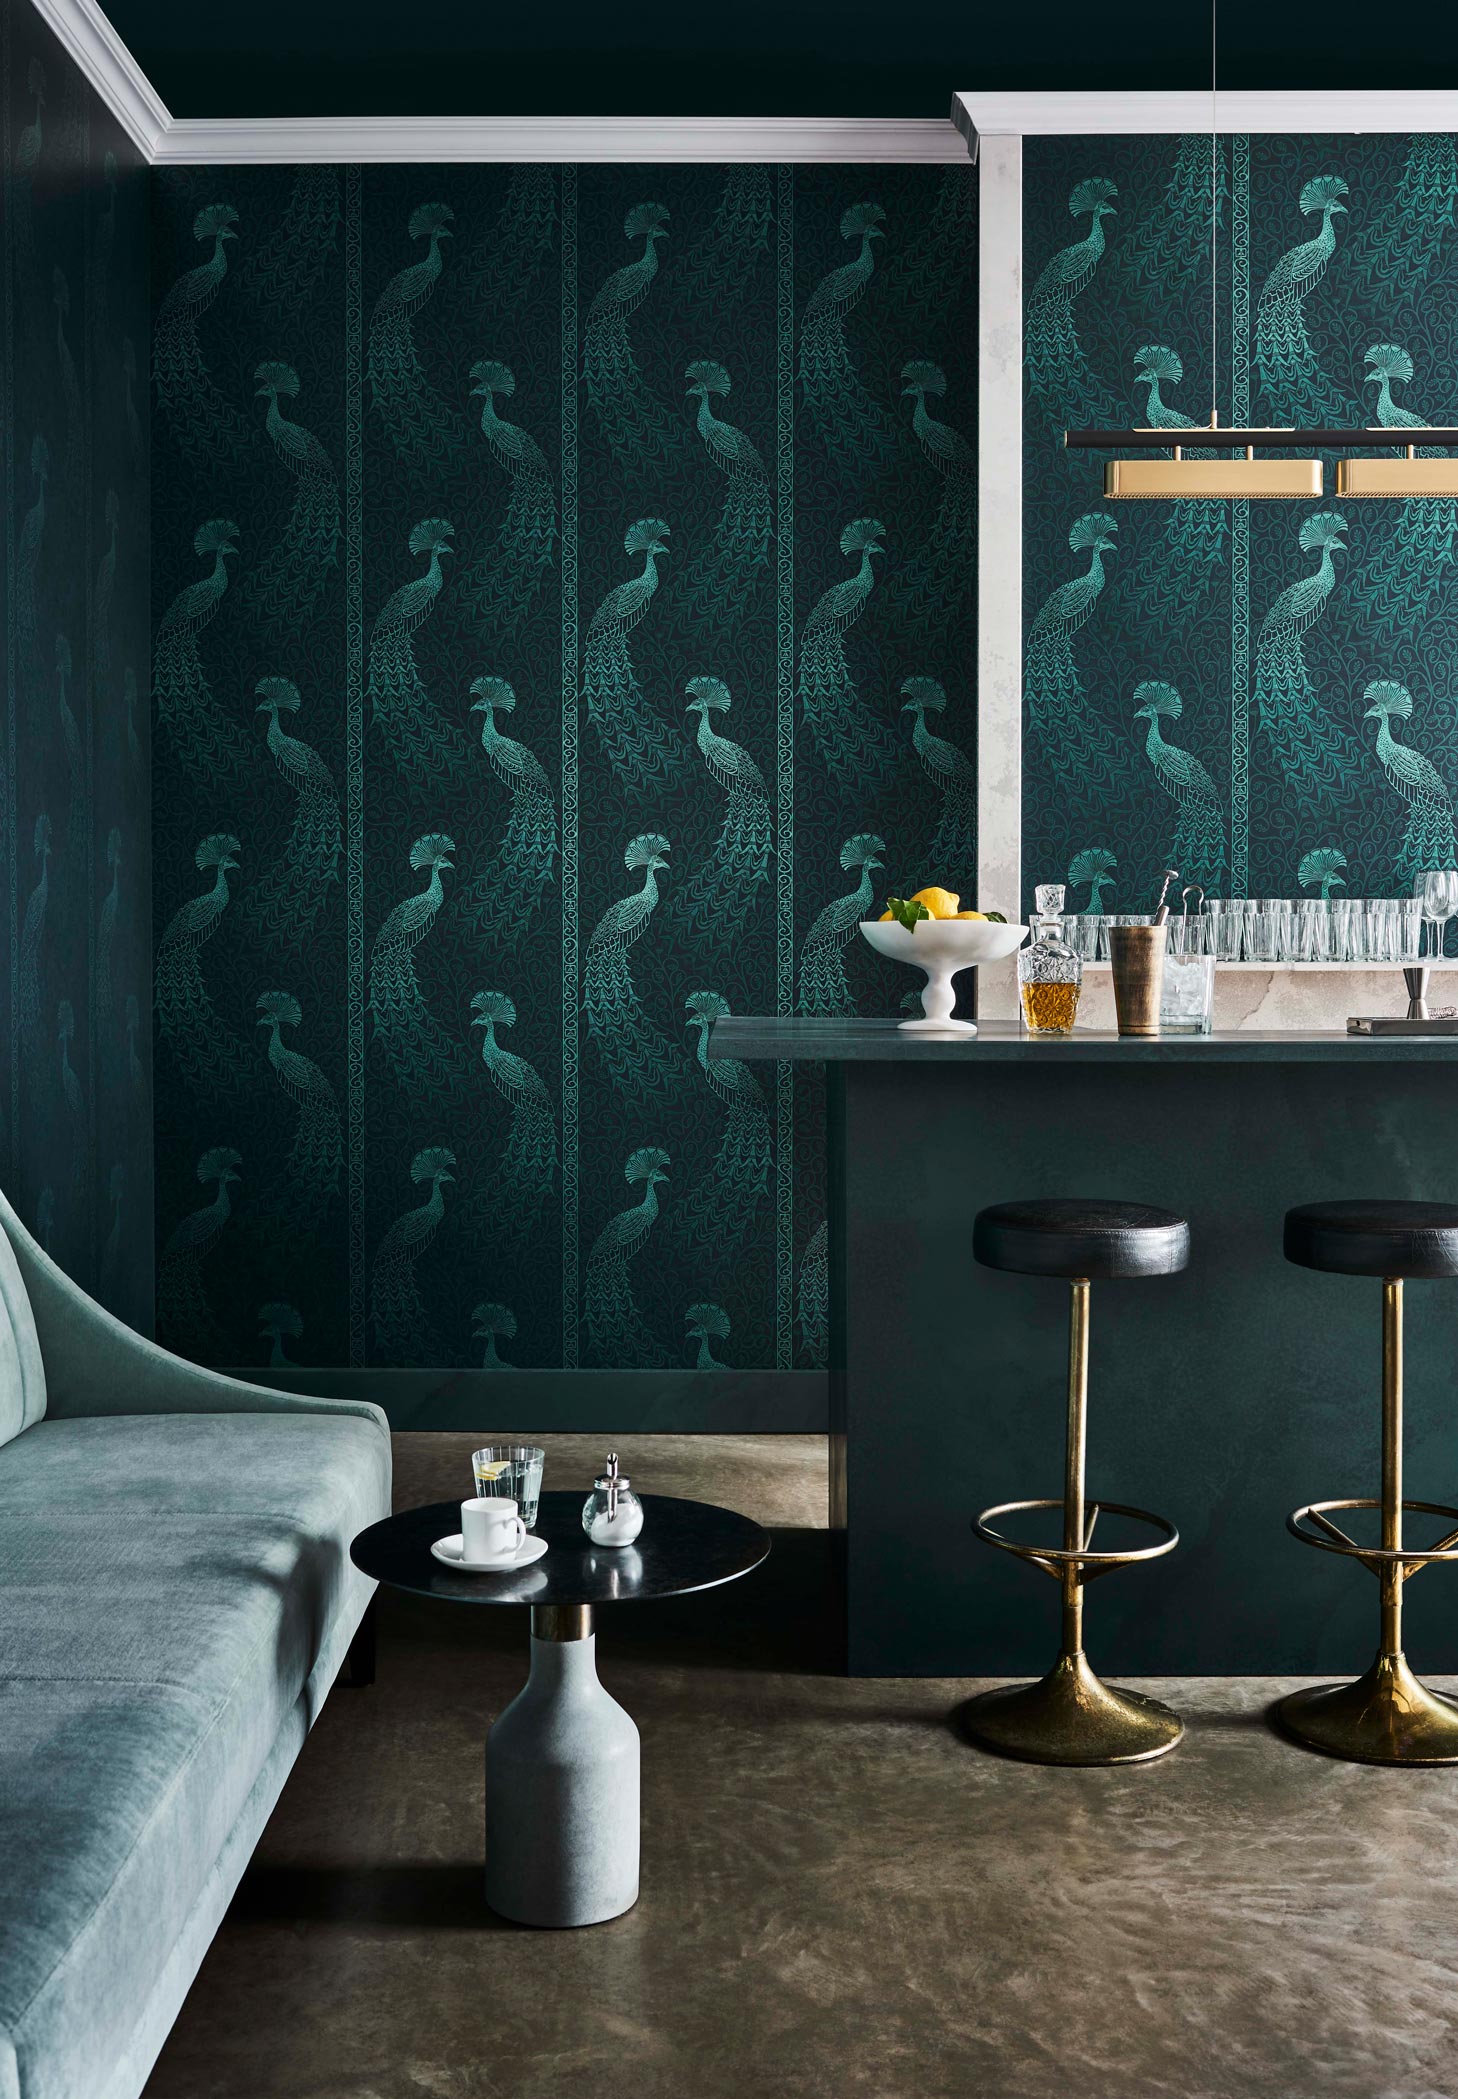 Wallpaper - Cole and Son - Pearwood - Pavo Parade - Metallic Petrol on Ink